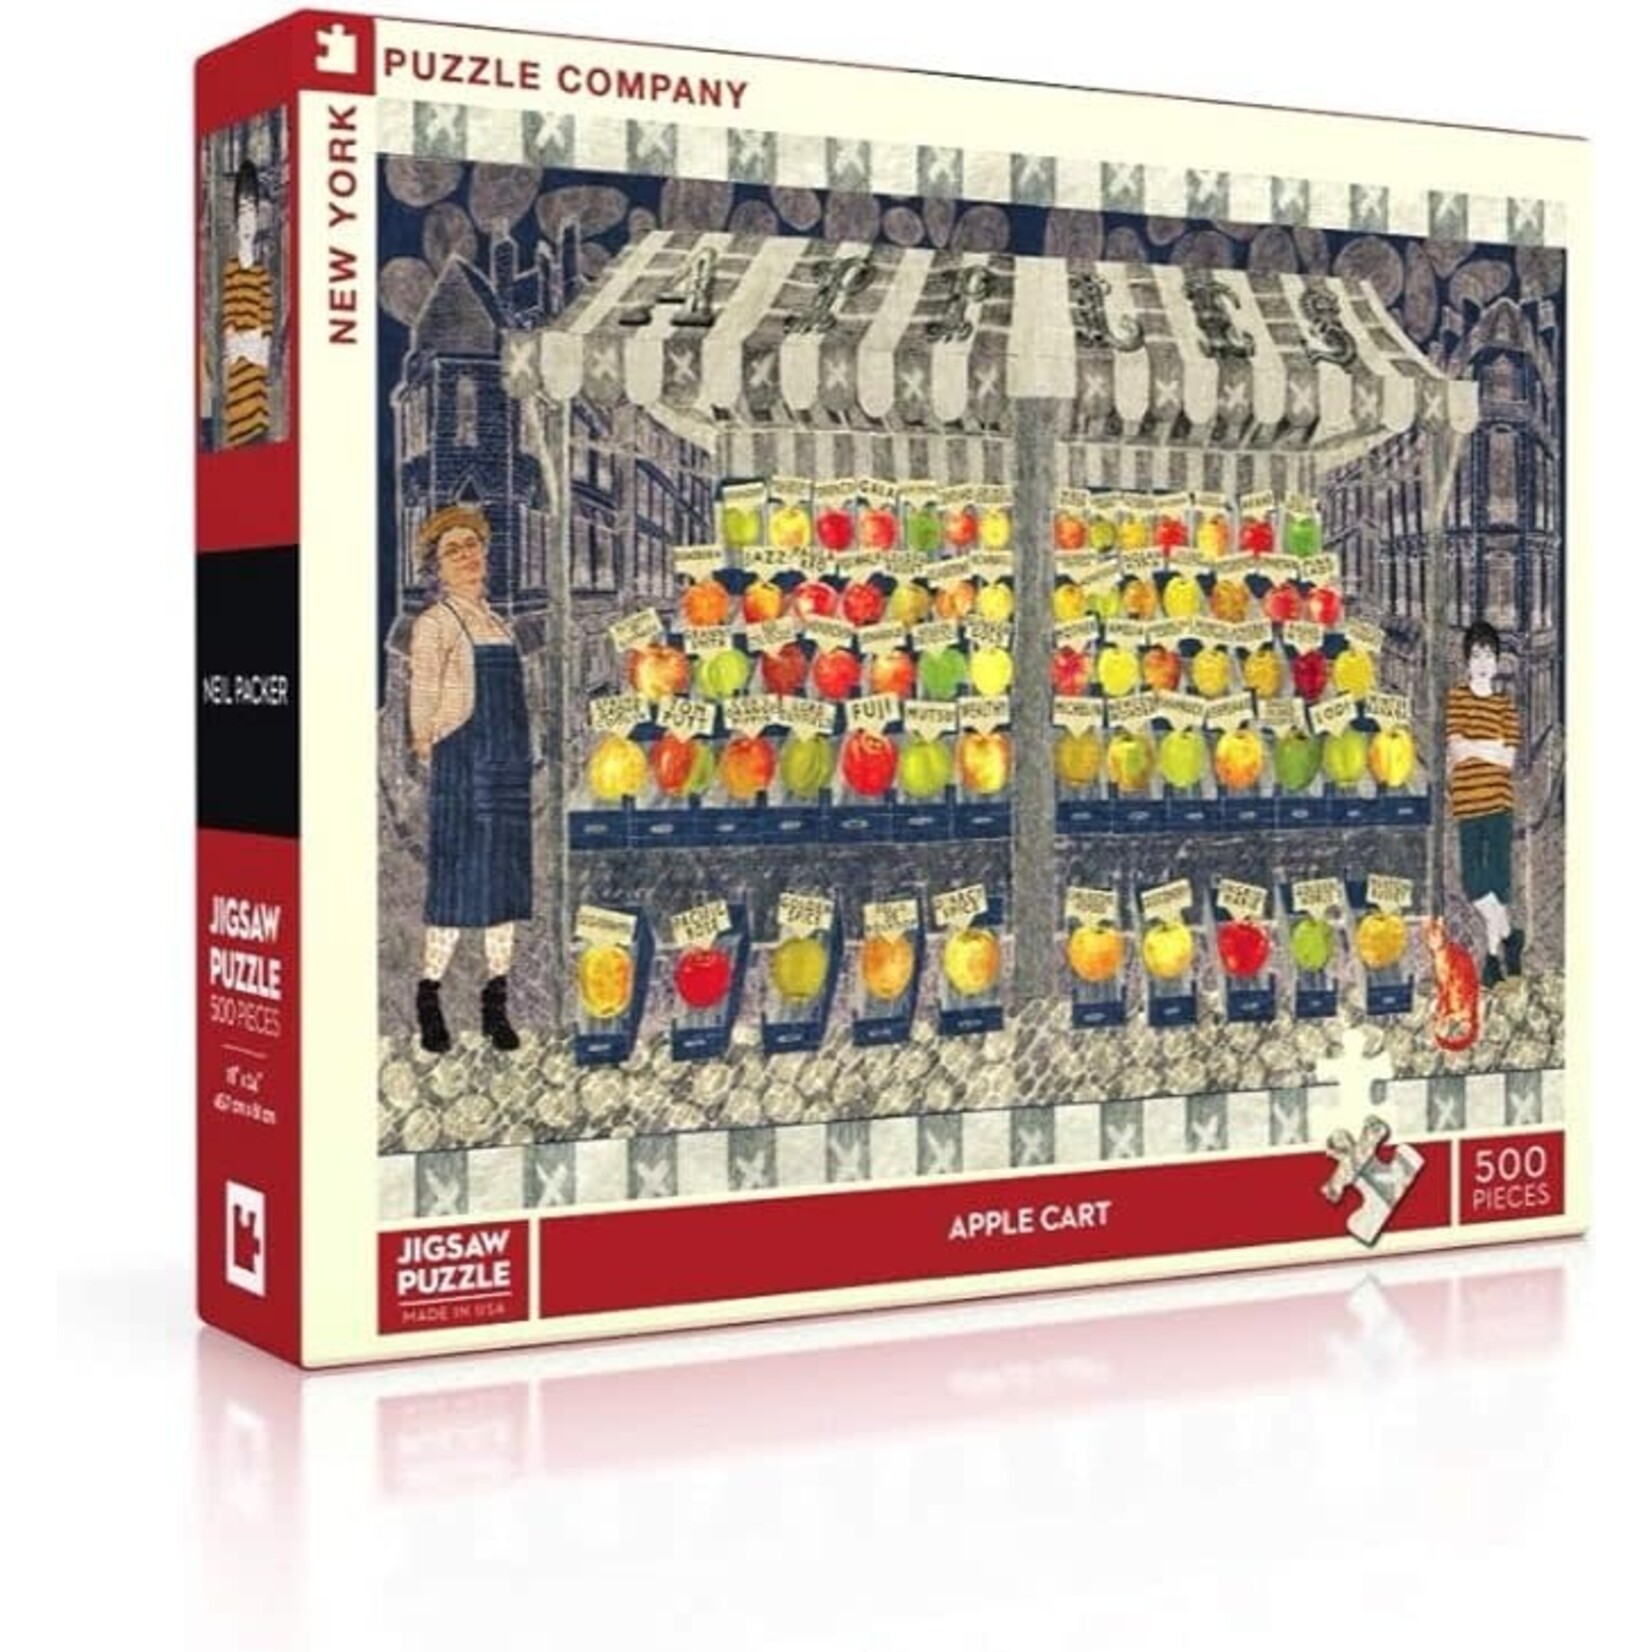 New York Puzzle Company Apple Cart, 500-Piece Jigsaw Puzzle